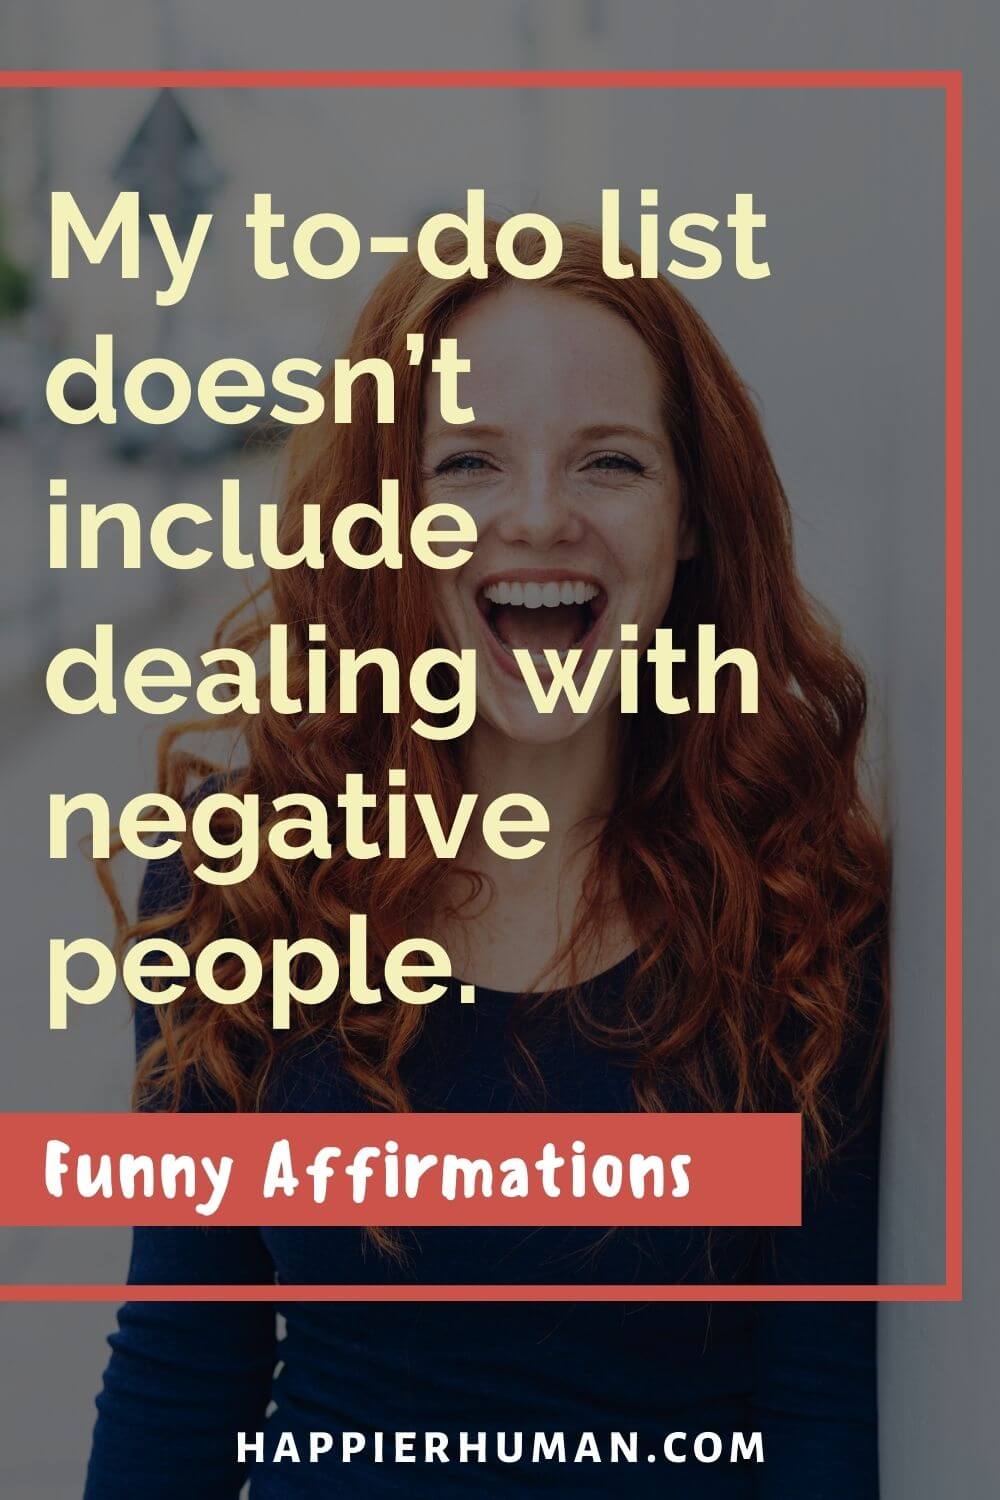 Funny Affirmations - My to-do list doesn’t include dealing with negative people. | funny affirmations for school | funny affirmations for teachers | funny affirmations for teachers